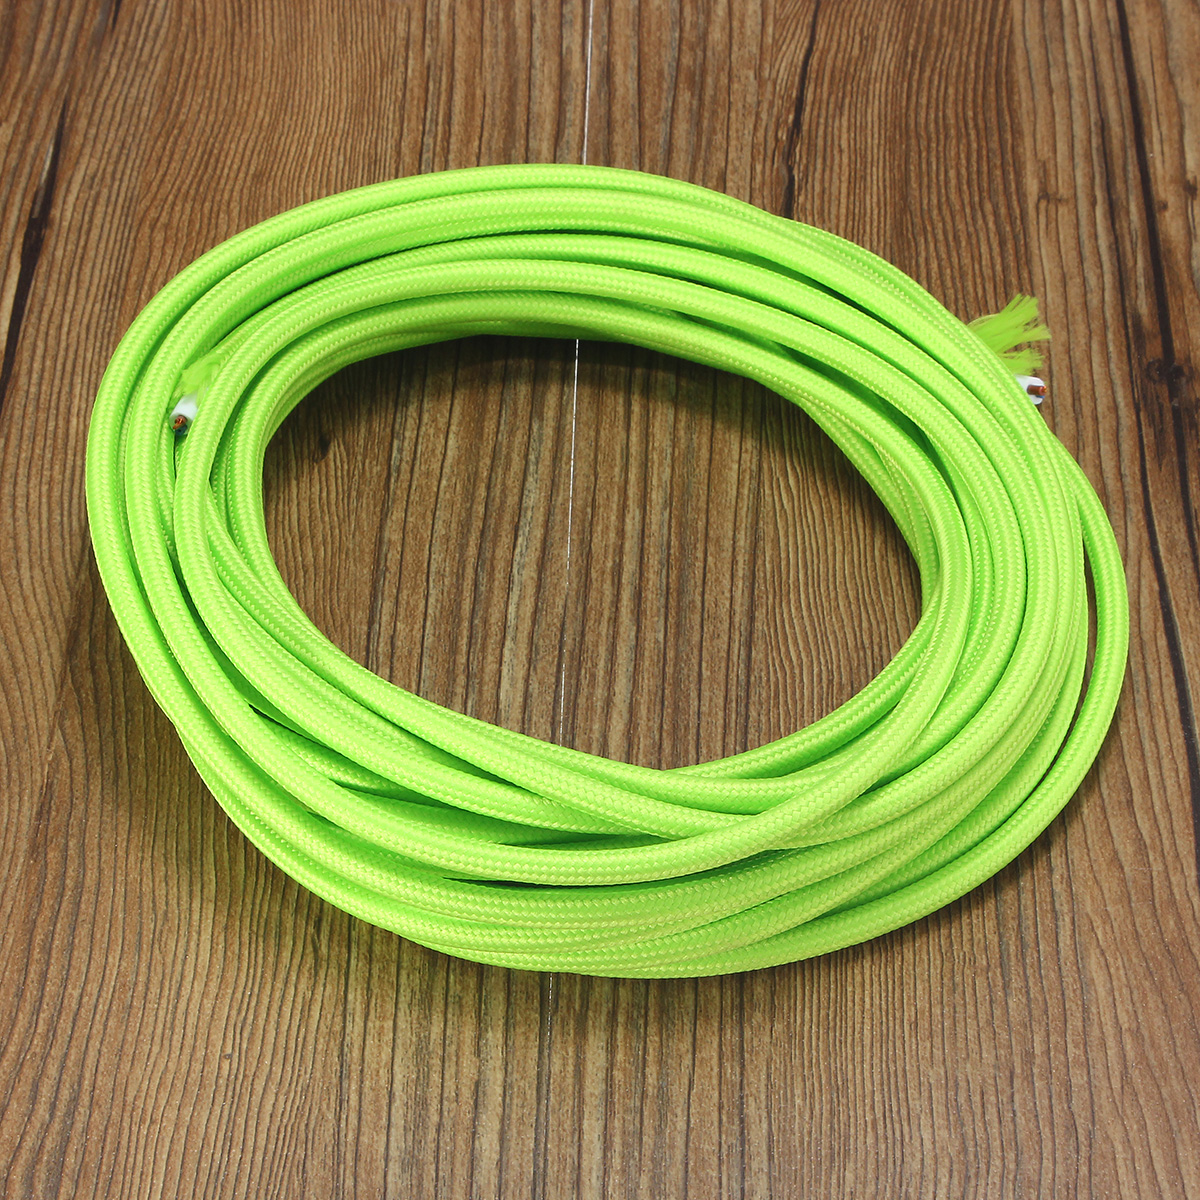 10M-2-Cord-Color-Vintage-Twist-Braided-Fabric-Light-Cable-Electric-Wire-1069140-2